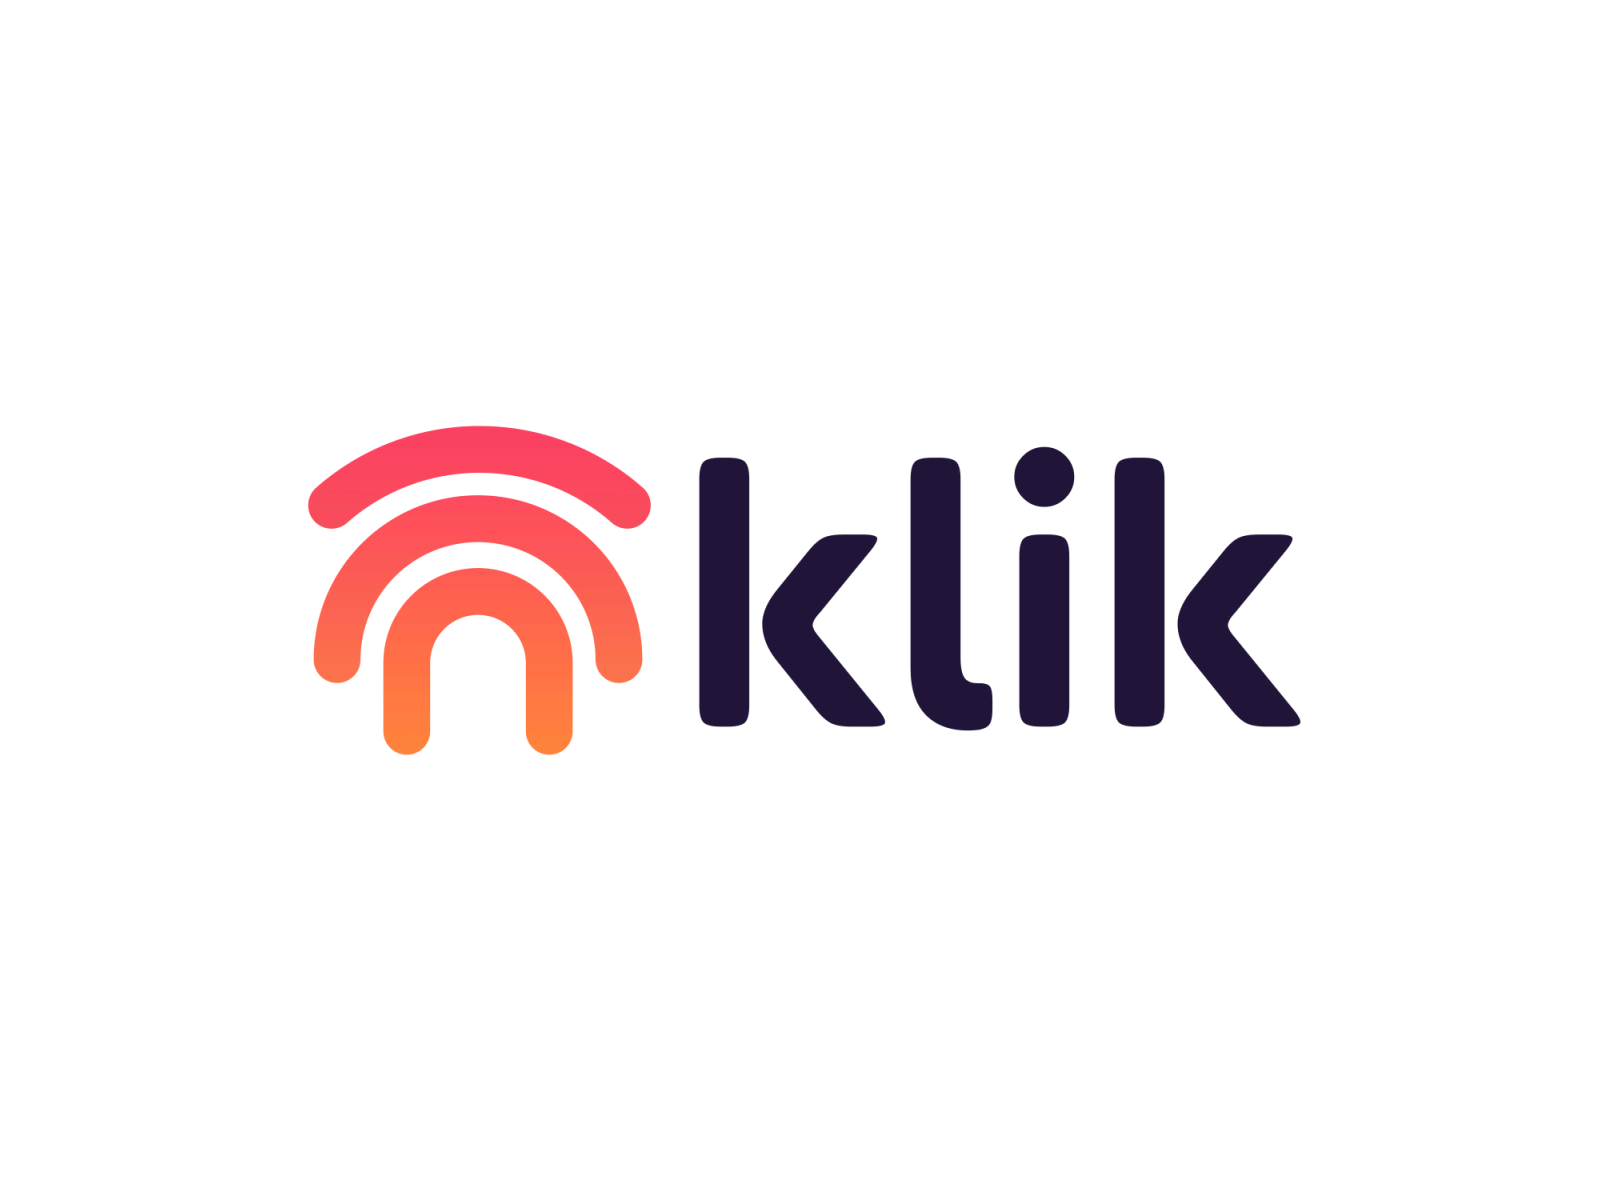 Klik Logo Animation reveal motiongraphics motion design motion logo reveal logo animation loader intro gif branding brand animation animation animated logo adrianinmotion after effects ae 2d animation 2d